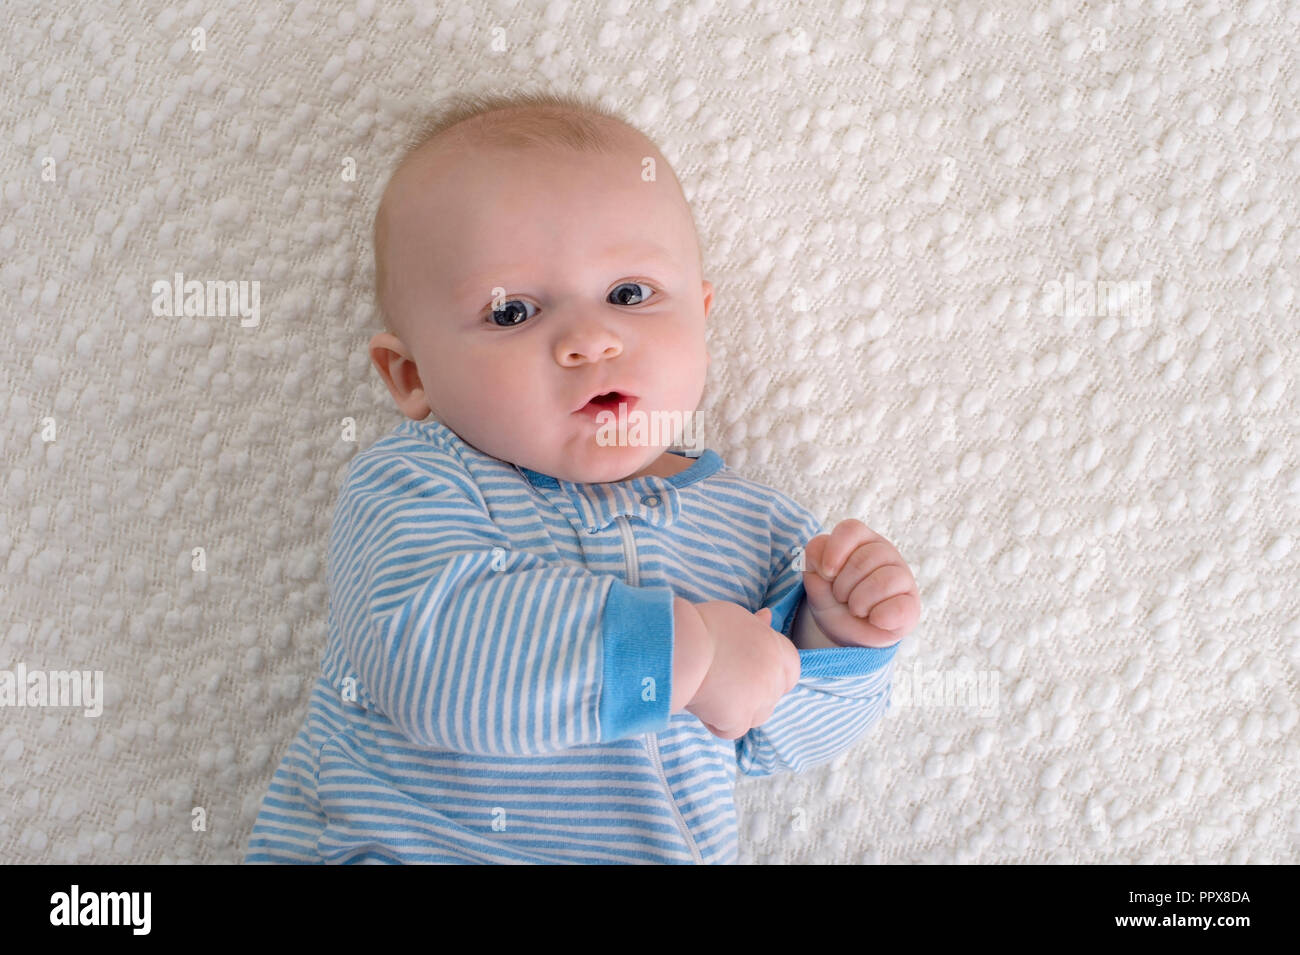 A 2 month old baby boy lying on his back on a white blanket. He is wearing blue and white striped pajamas and is looking at the camera. Stock Photo